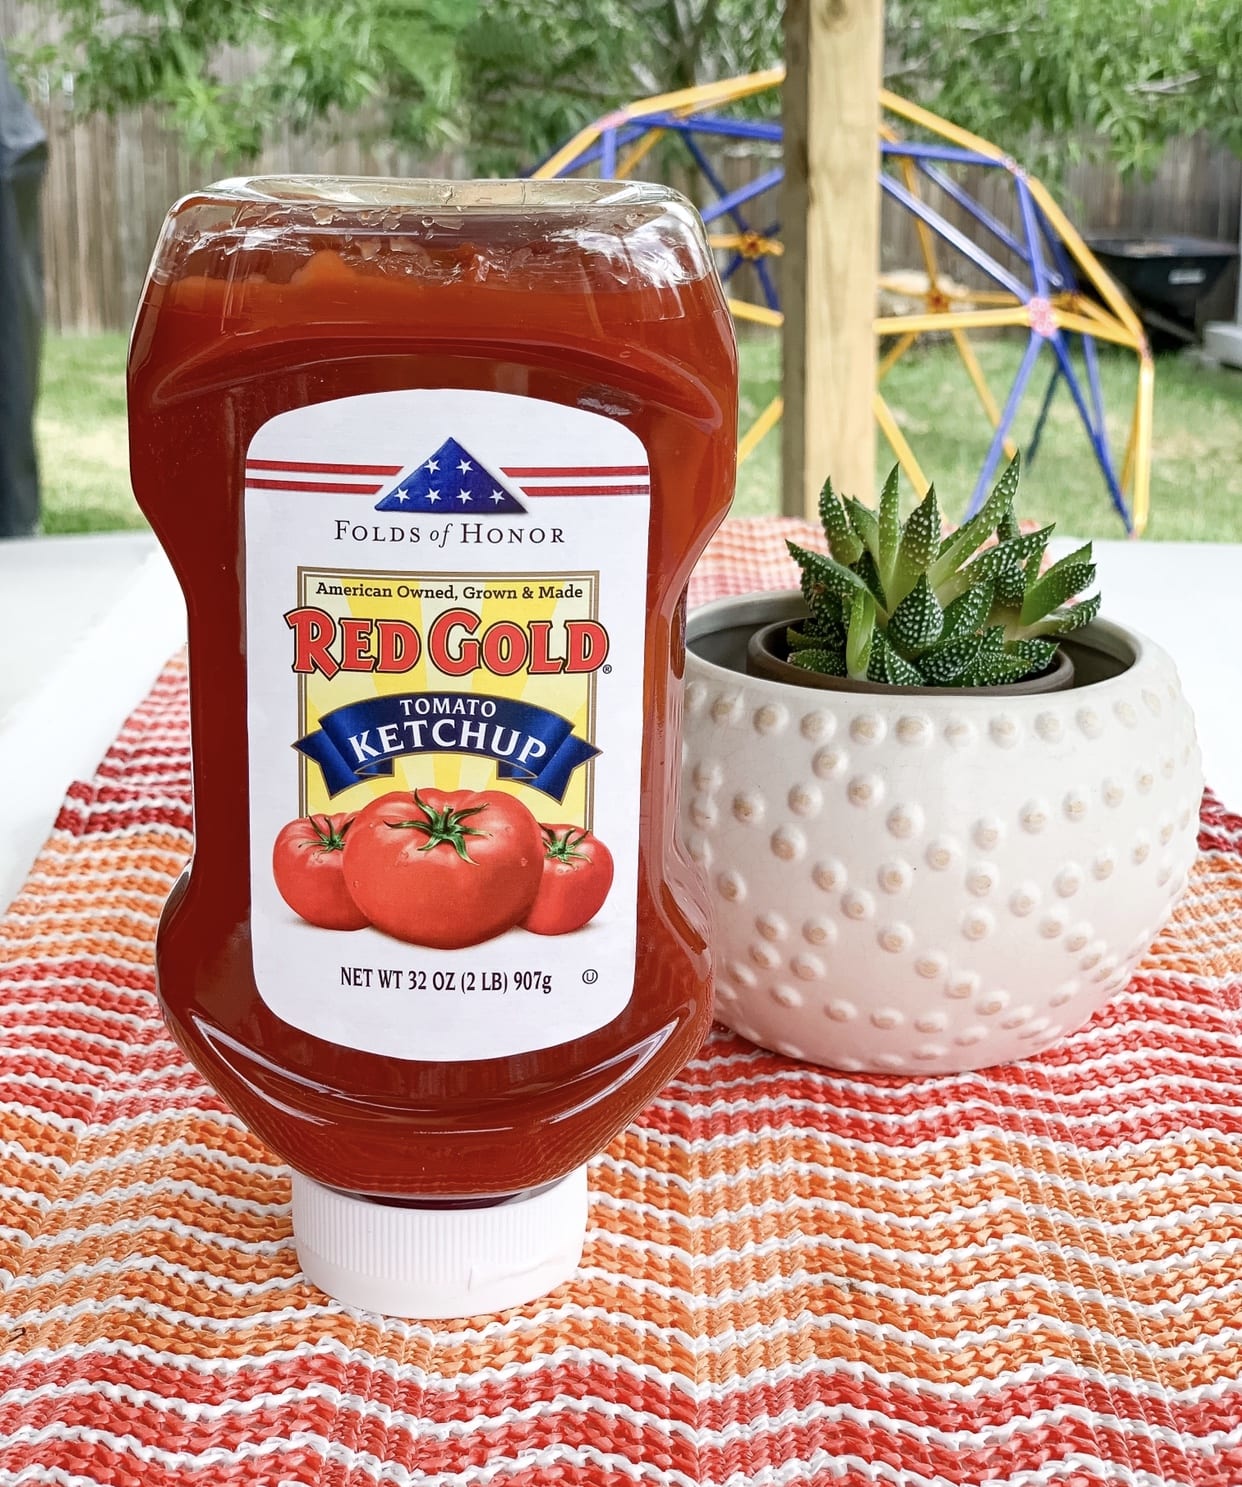 Red Gold Tomato Ketchup, Summer Favorites, outdoor eats